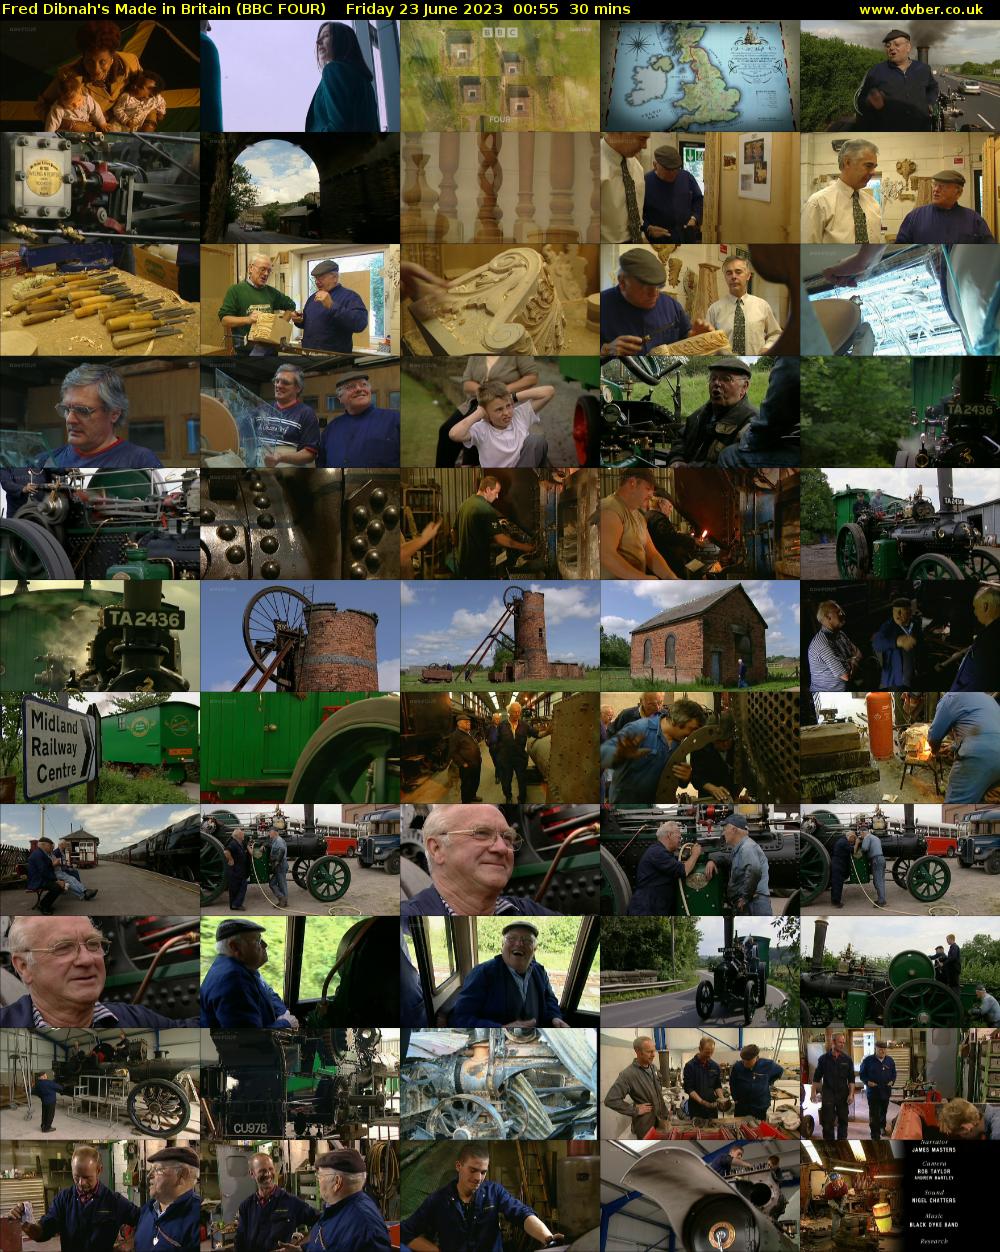 Fred Dibnah's Made in Britain (BBC FOUR) Friday 23 June 2023 00:55 - 01:25